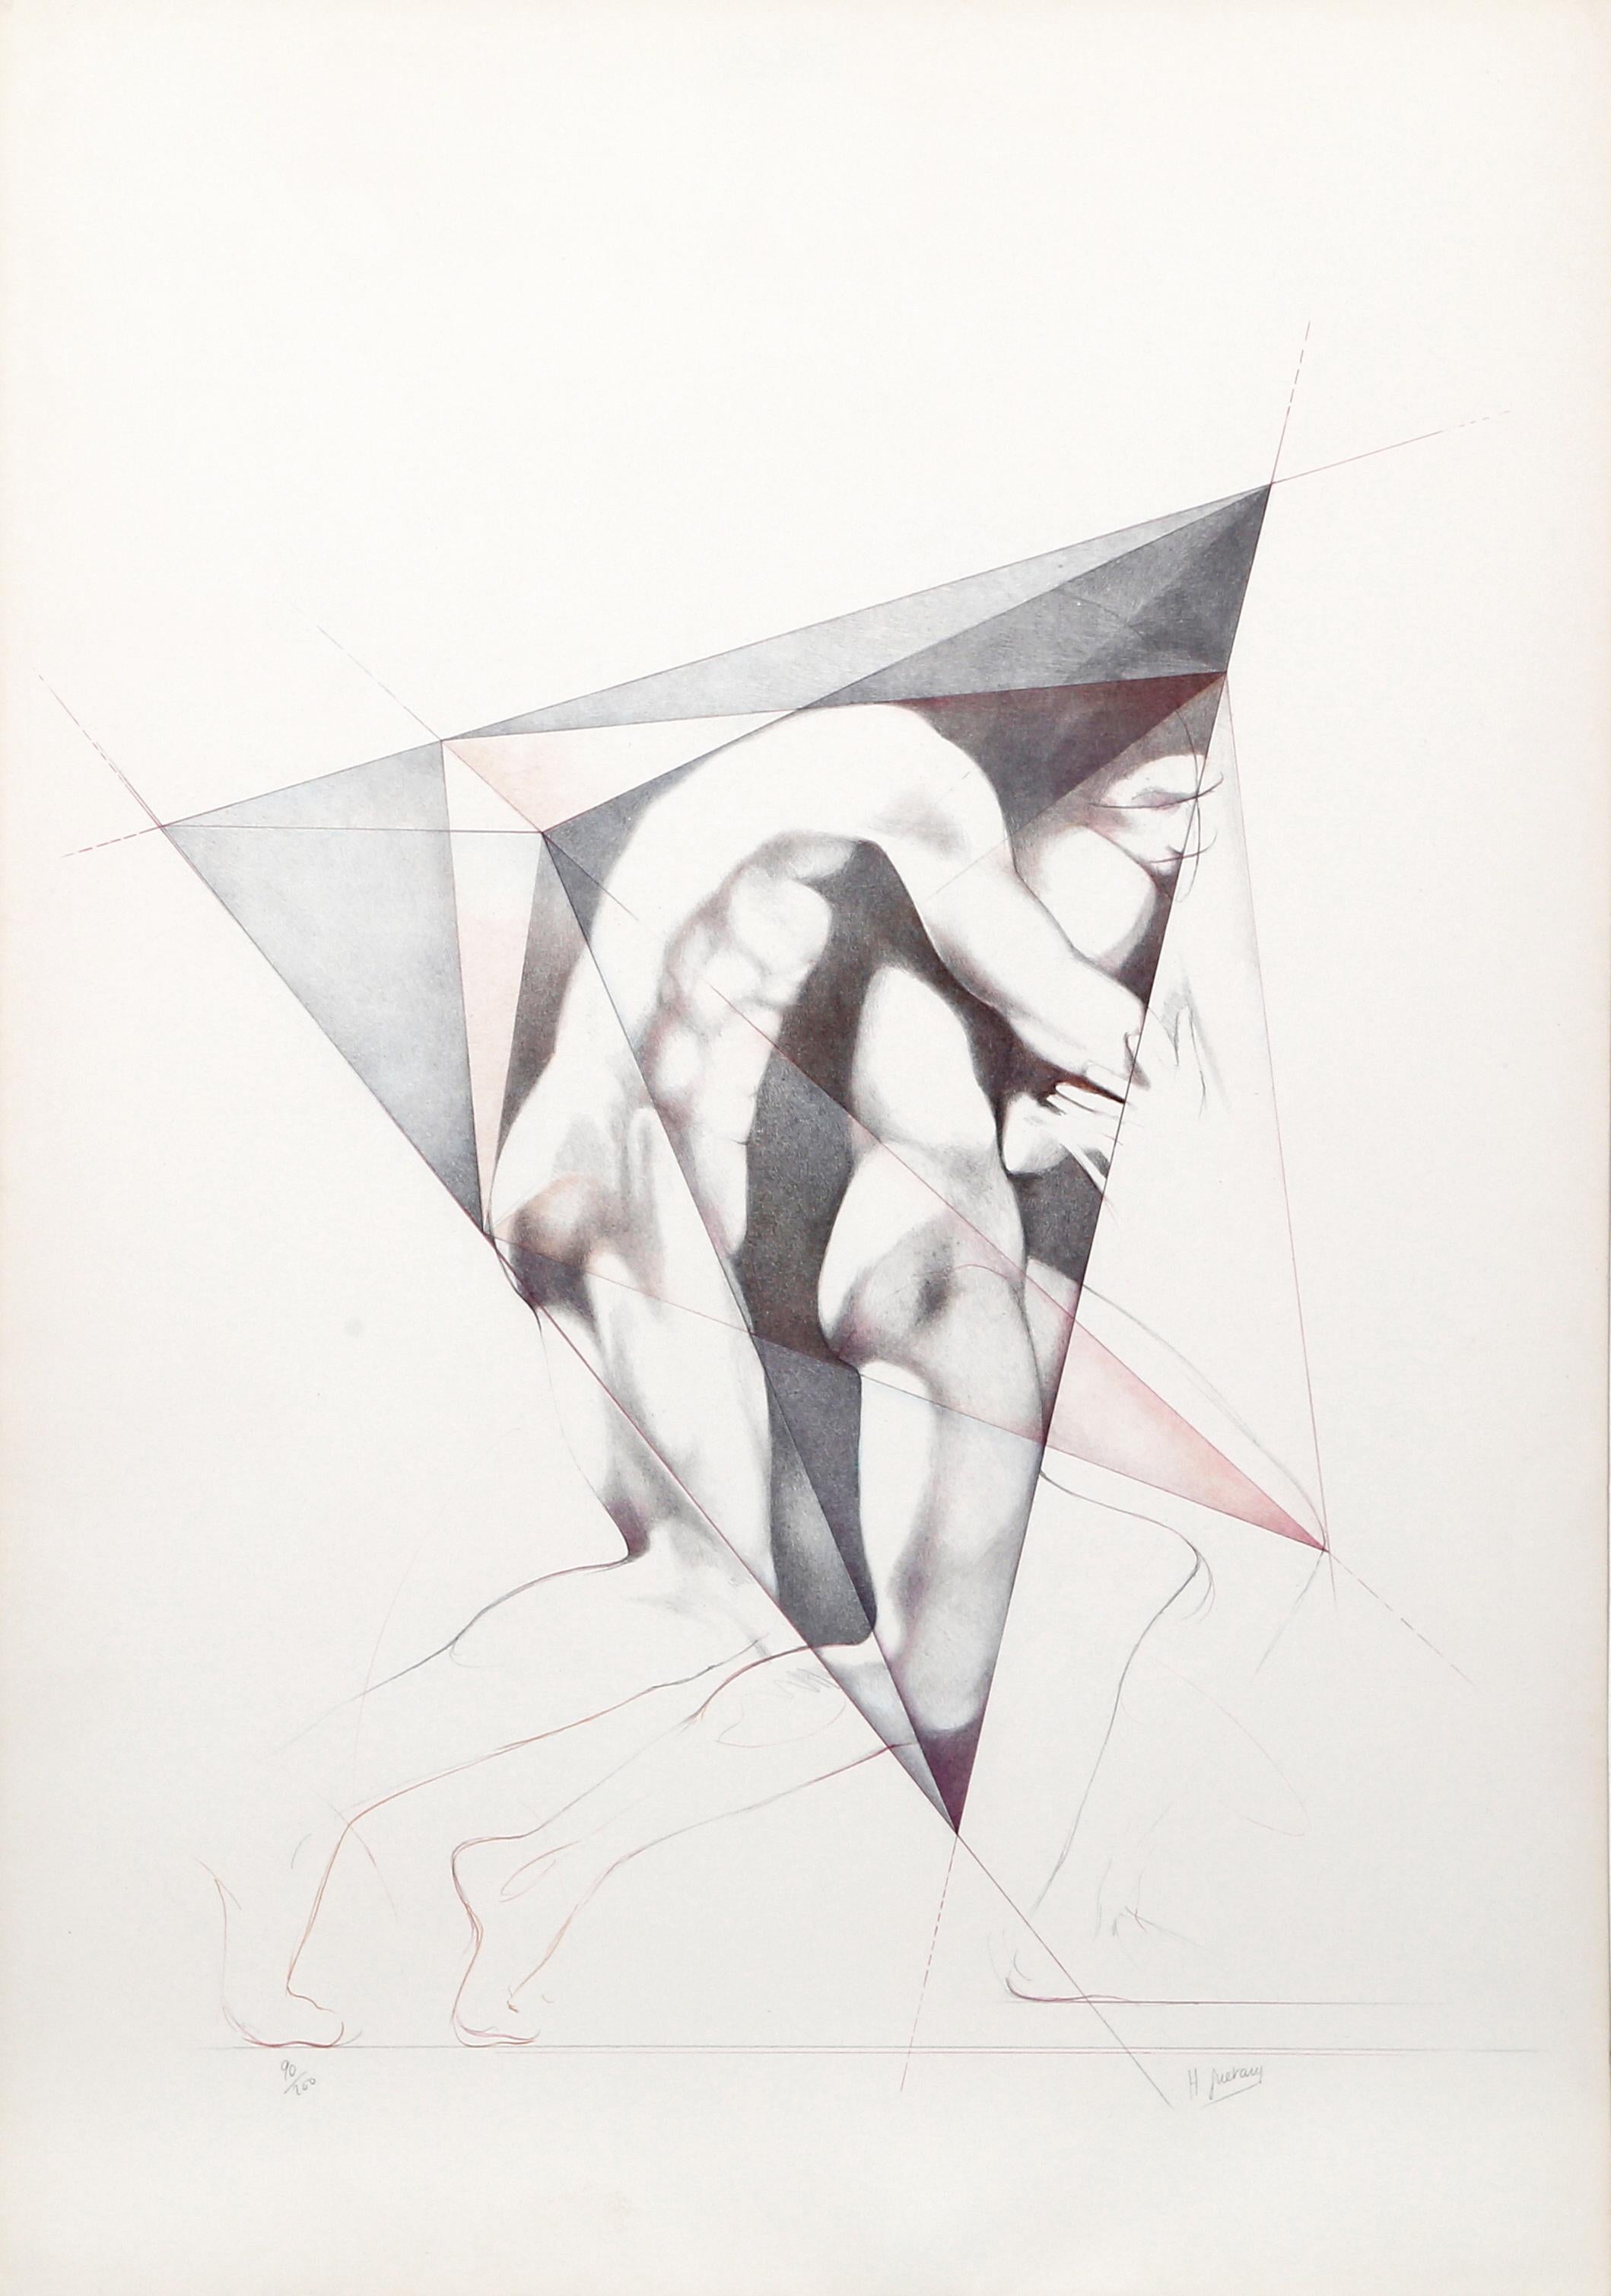 Artist: Helene Guetary, French/American (1957 - )
Title: Move II
Year: circa 1979
Medium: Lithograph on Arches, Signed and Numbered in Pencil
Edition: 200
Size: 36 x 25.5 in. (91.44 x 64.77 cm)